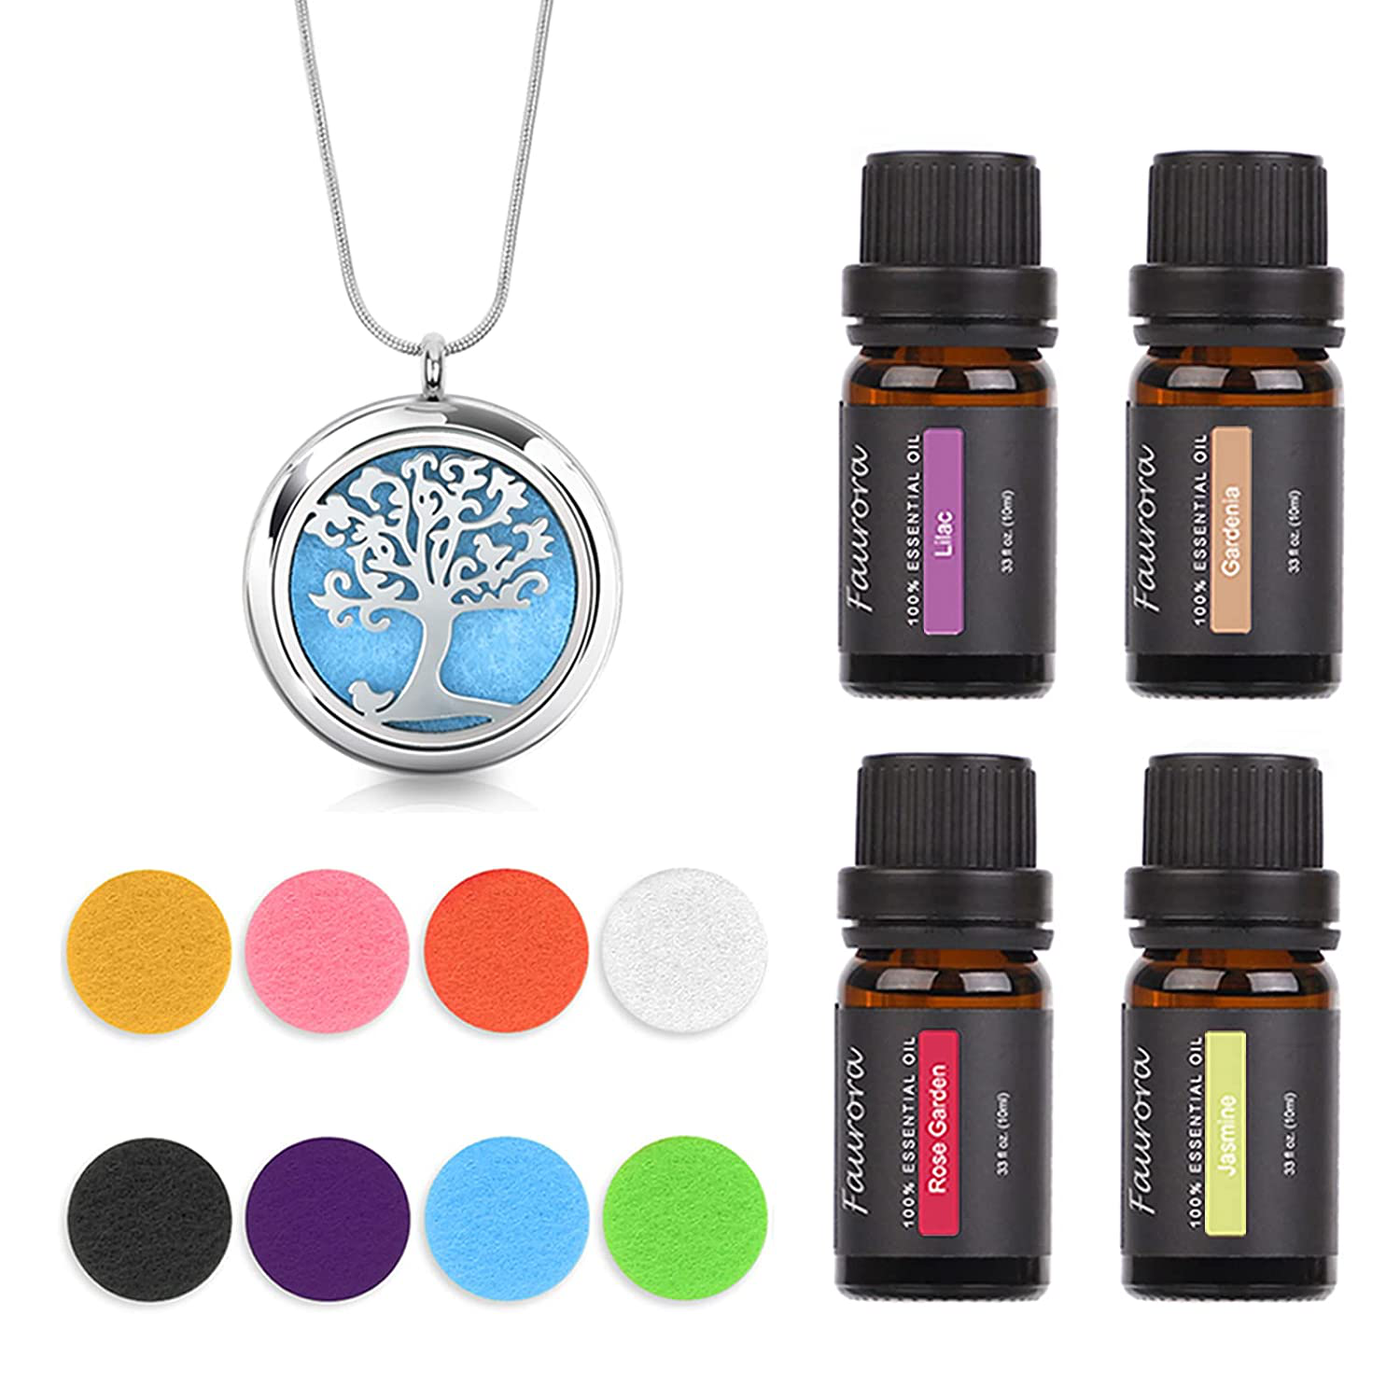 Family Tree of Life Essential Oil Aromatherapy Pendant Necklace w/ 4 Aroma Oils - 27.6" Adjustable Chain Perfume Necklace